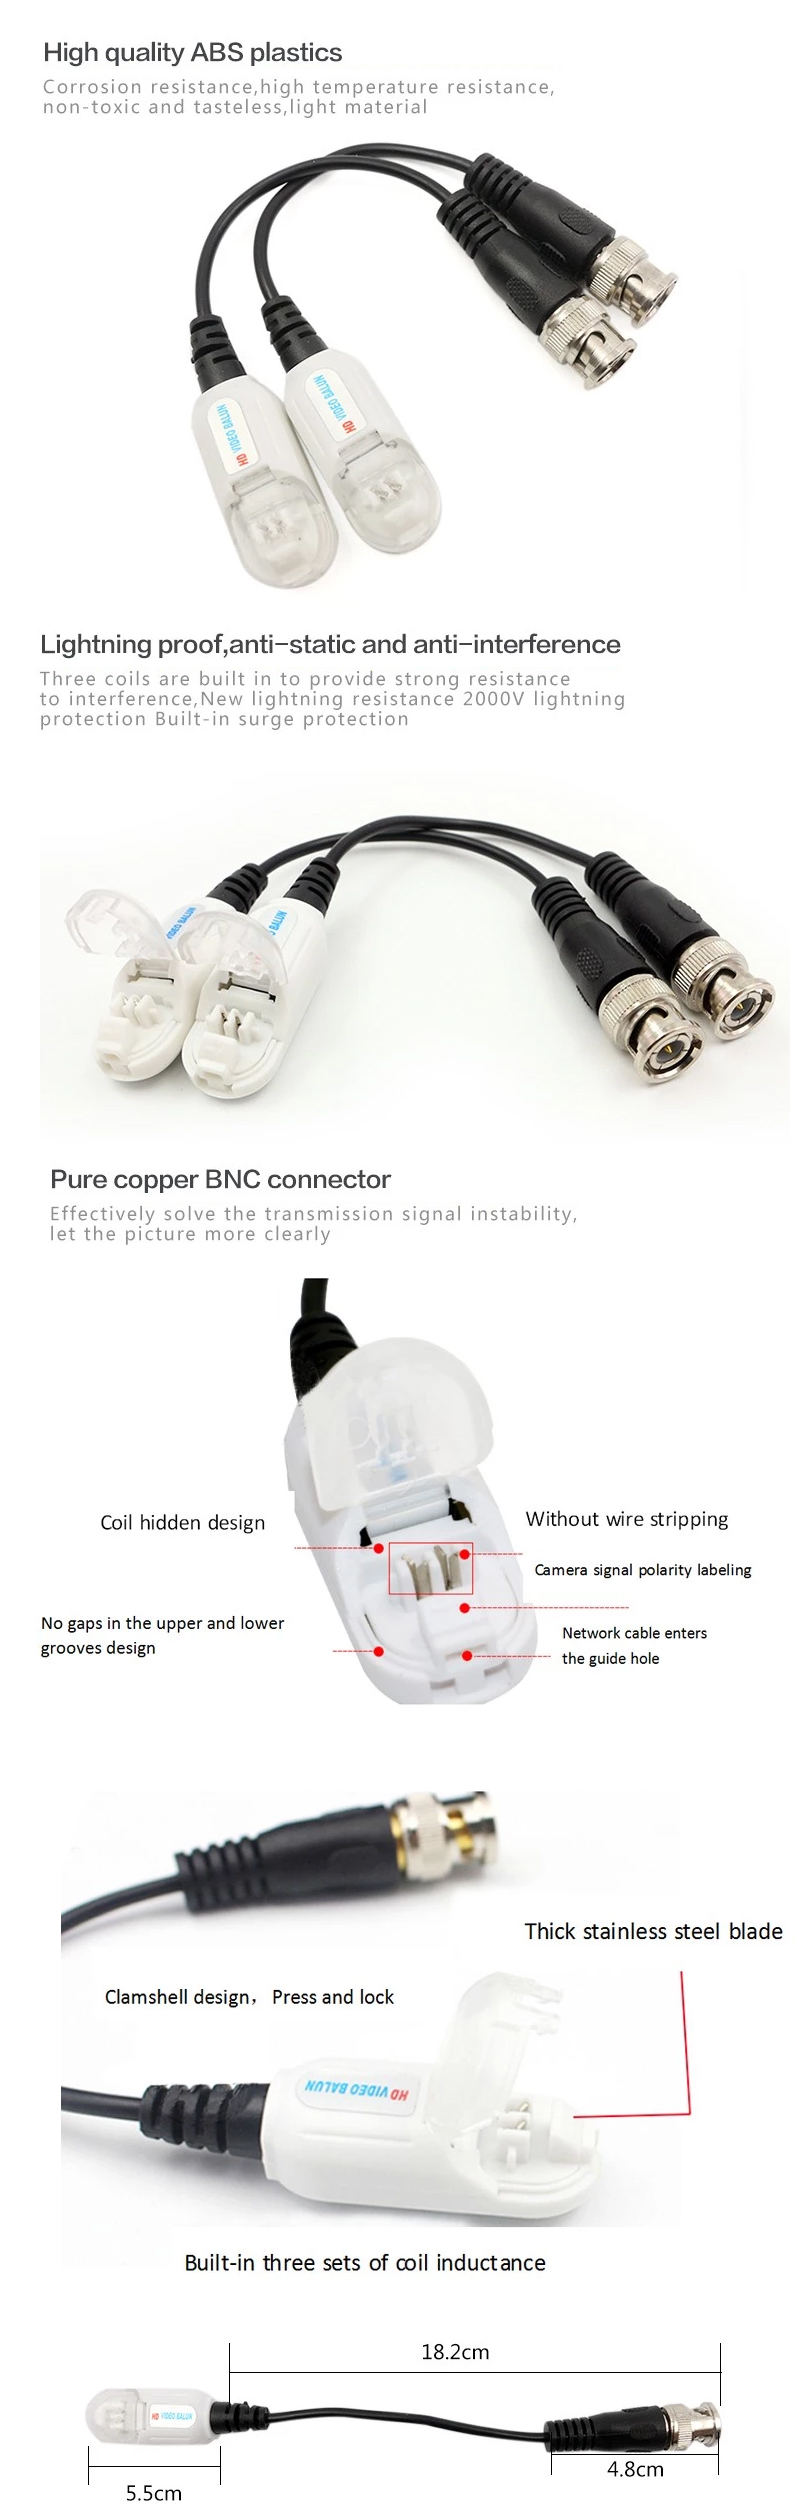 Passive HD Video Balun Without Wire-Stripping(图1)